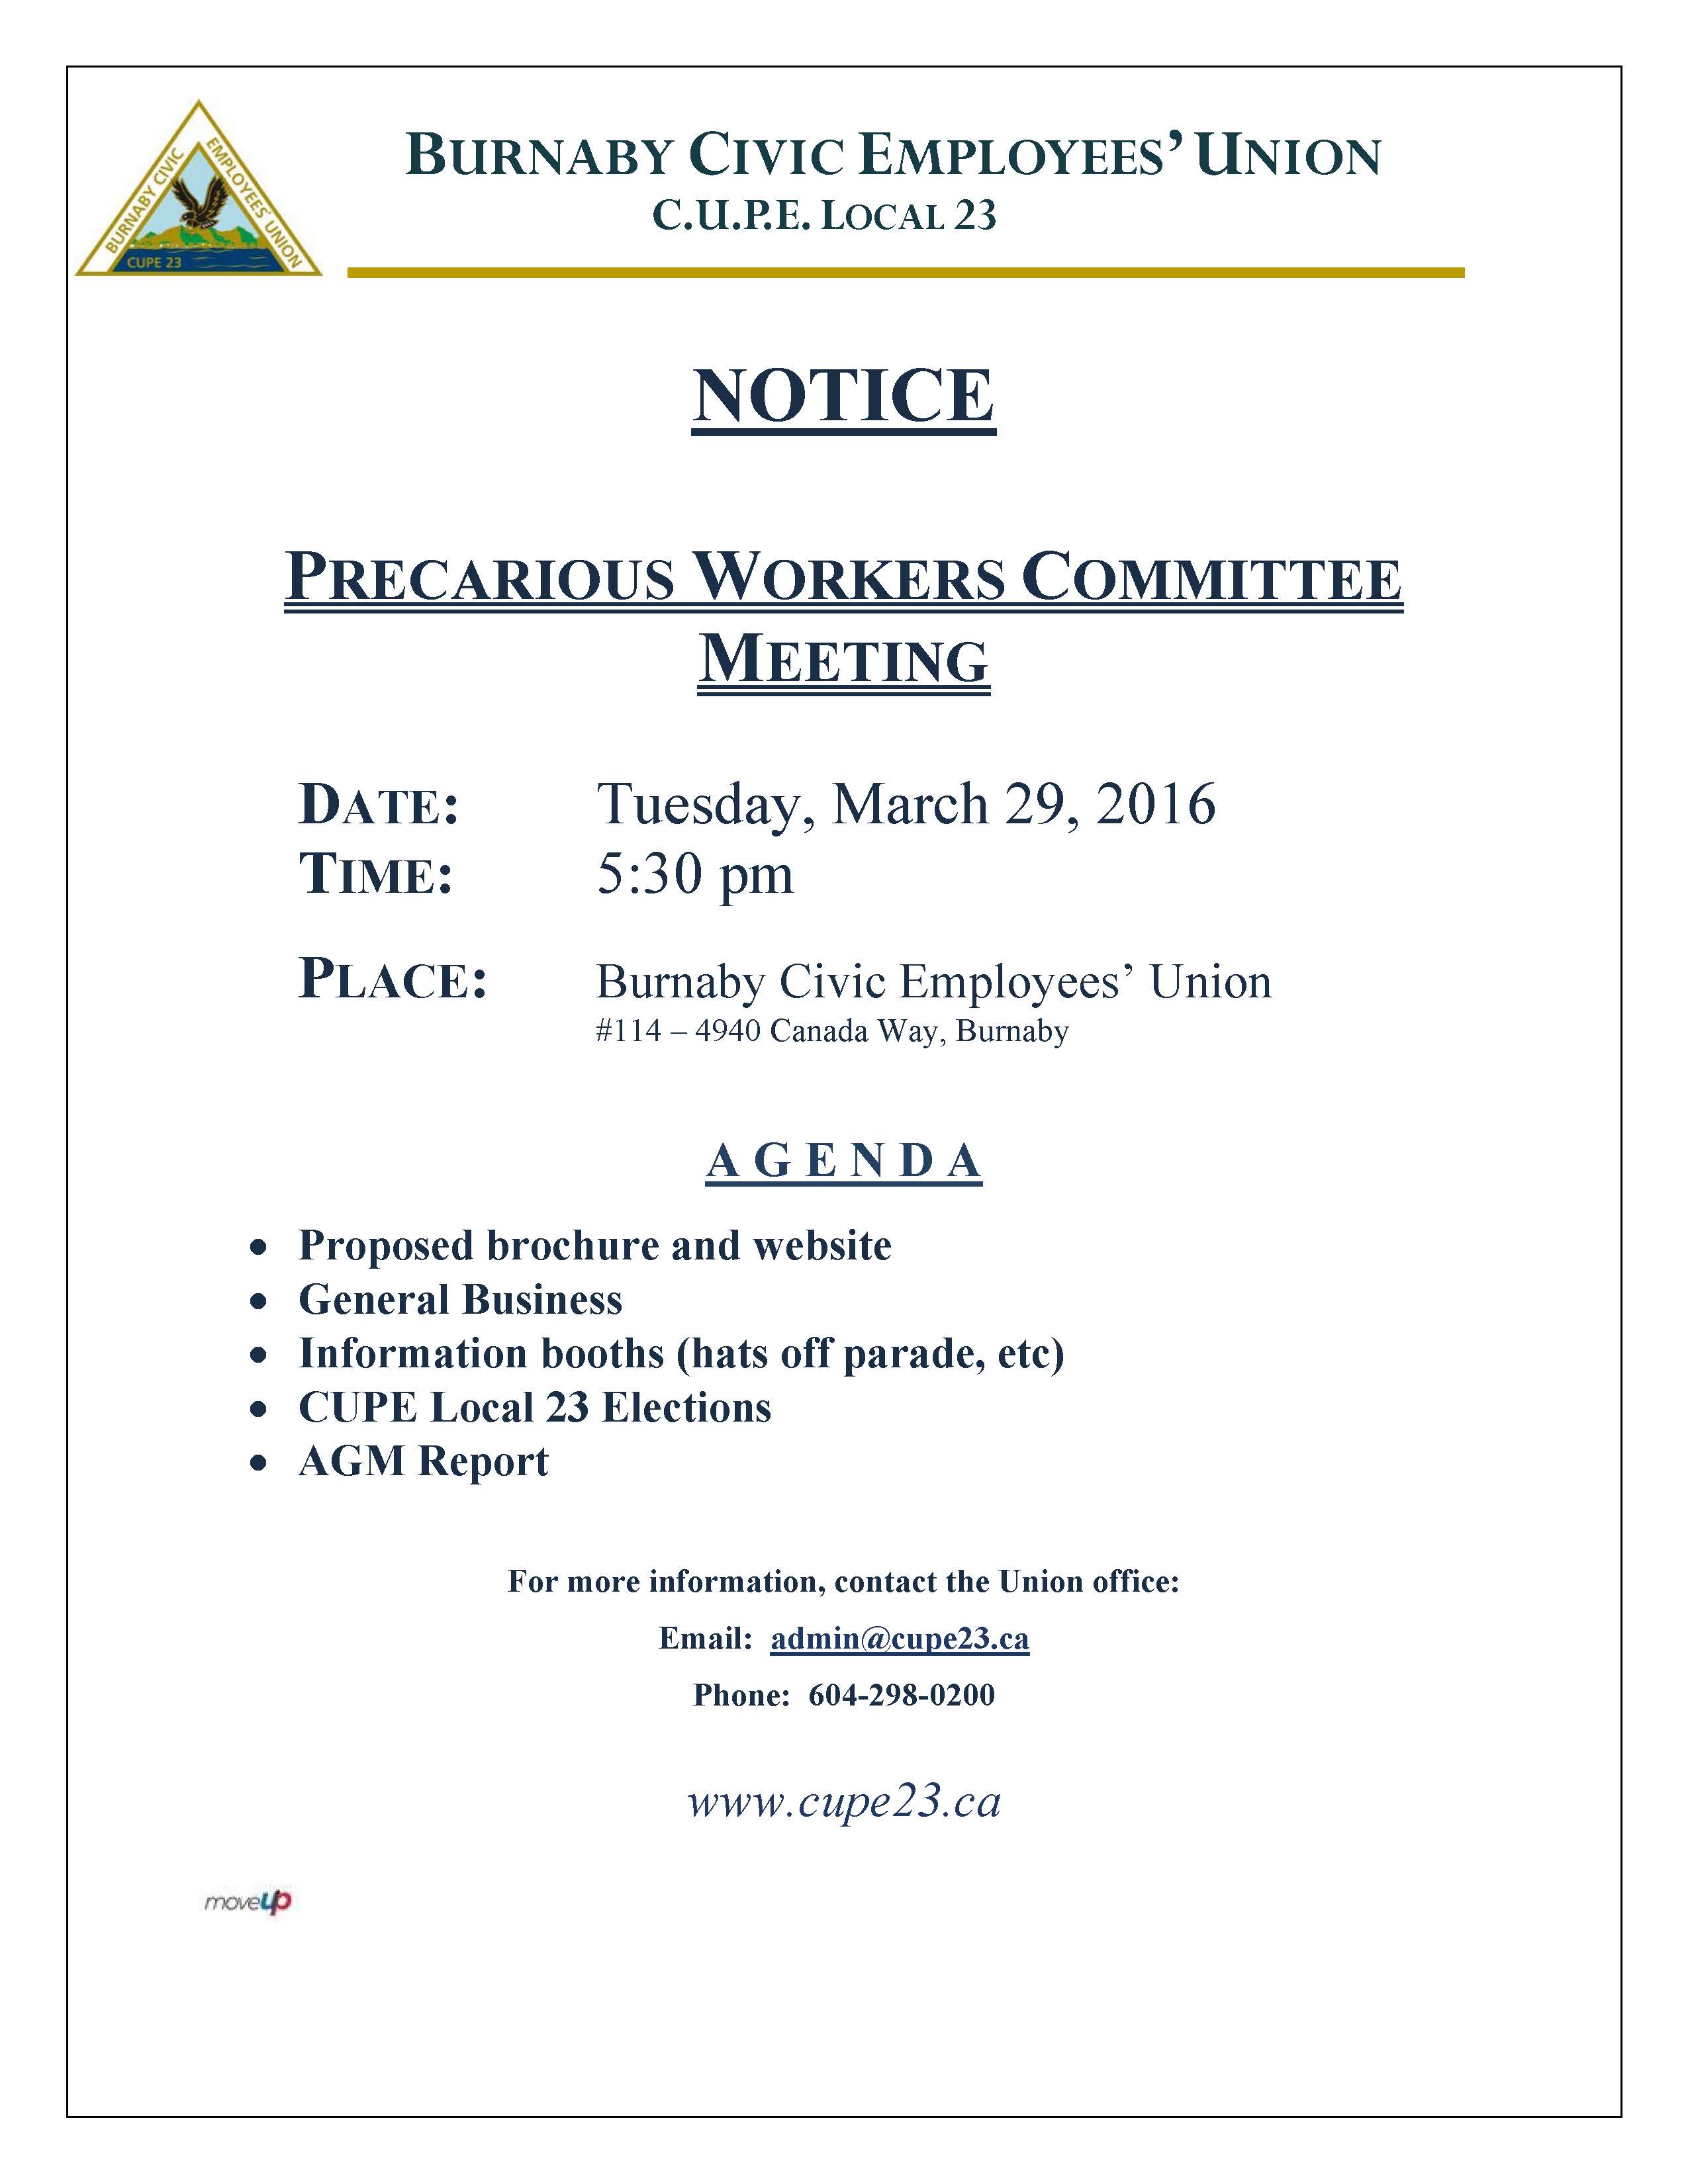 PWC Meeting Notice 16-03-29 - CUPE 23